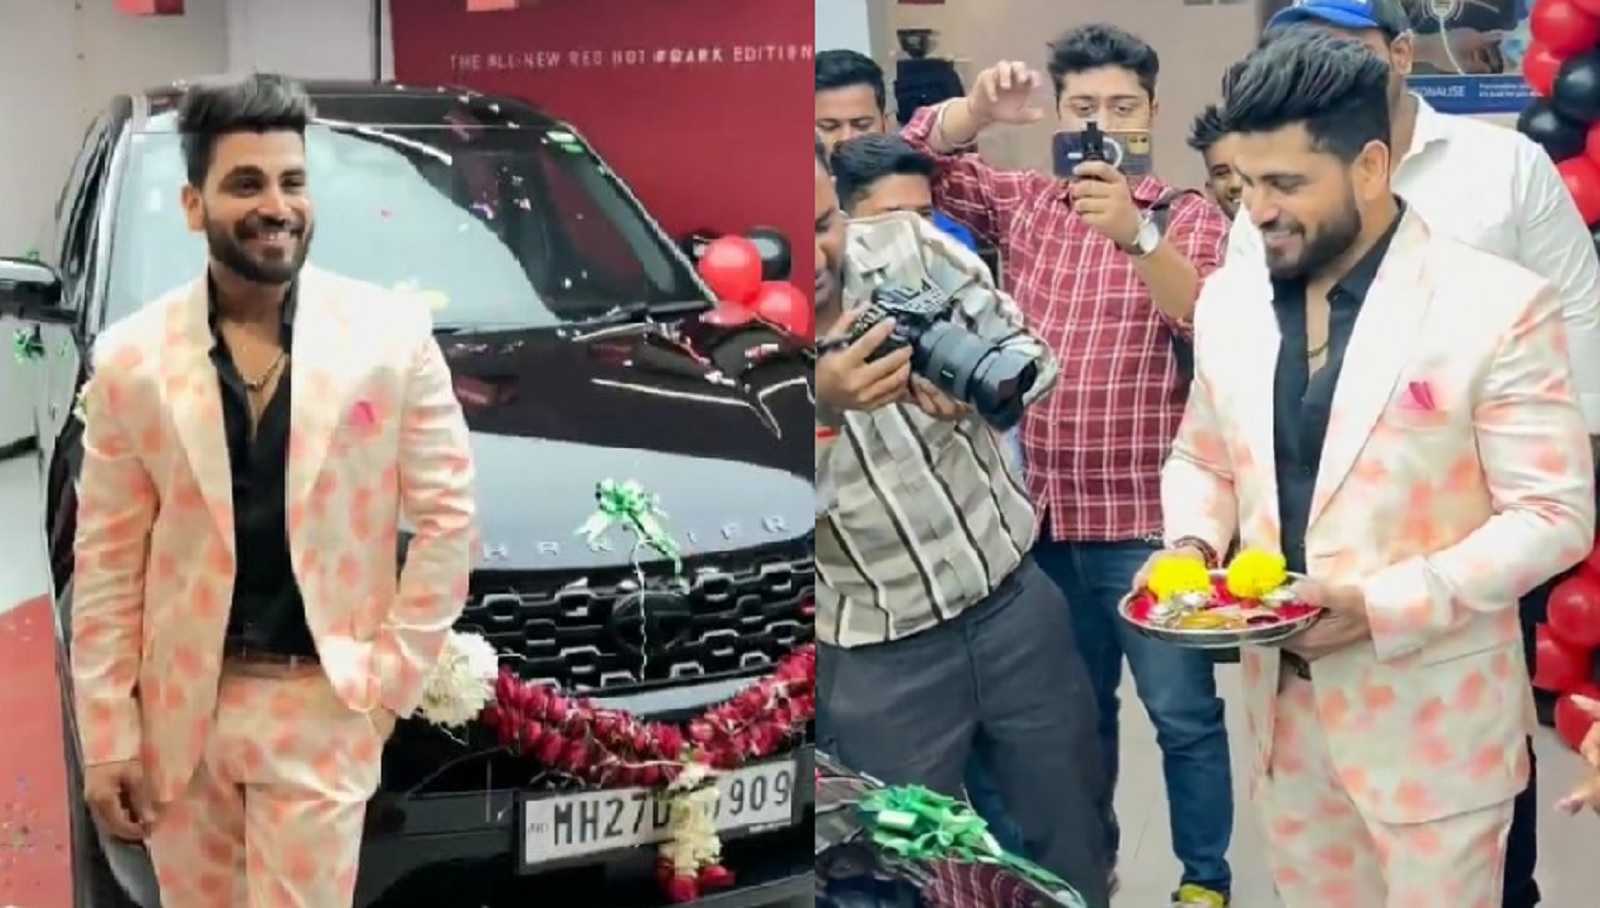 'This is just beginning': Shiv Thakare's fans share excitement as Bigg Boss 16 fame buys a swanky car having his birth date number plate